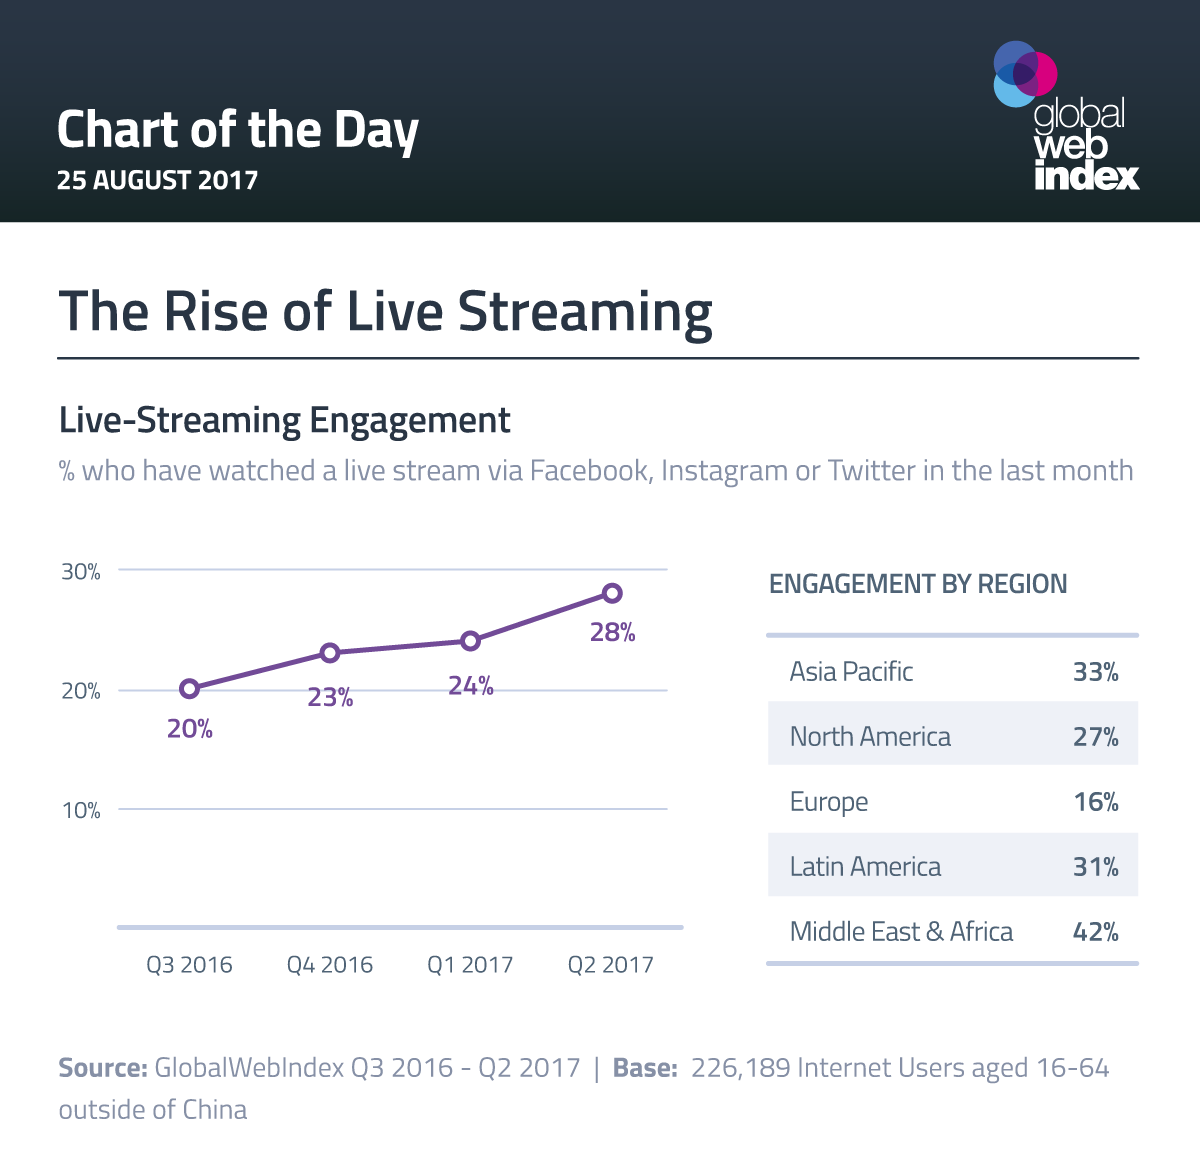 The Rise of Live Streaming